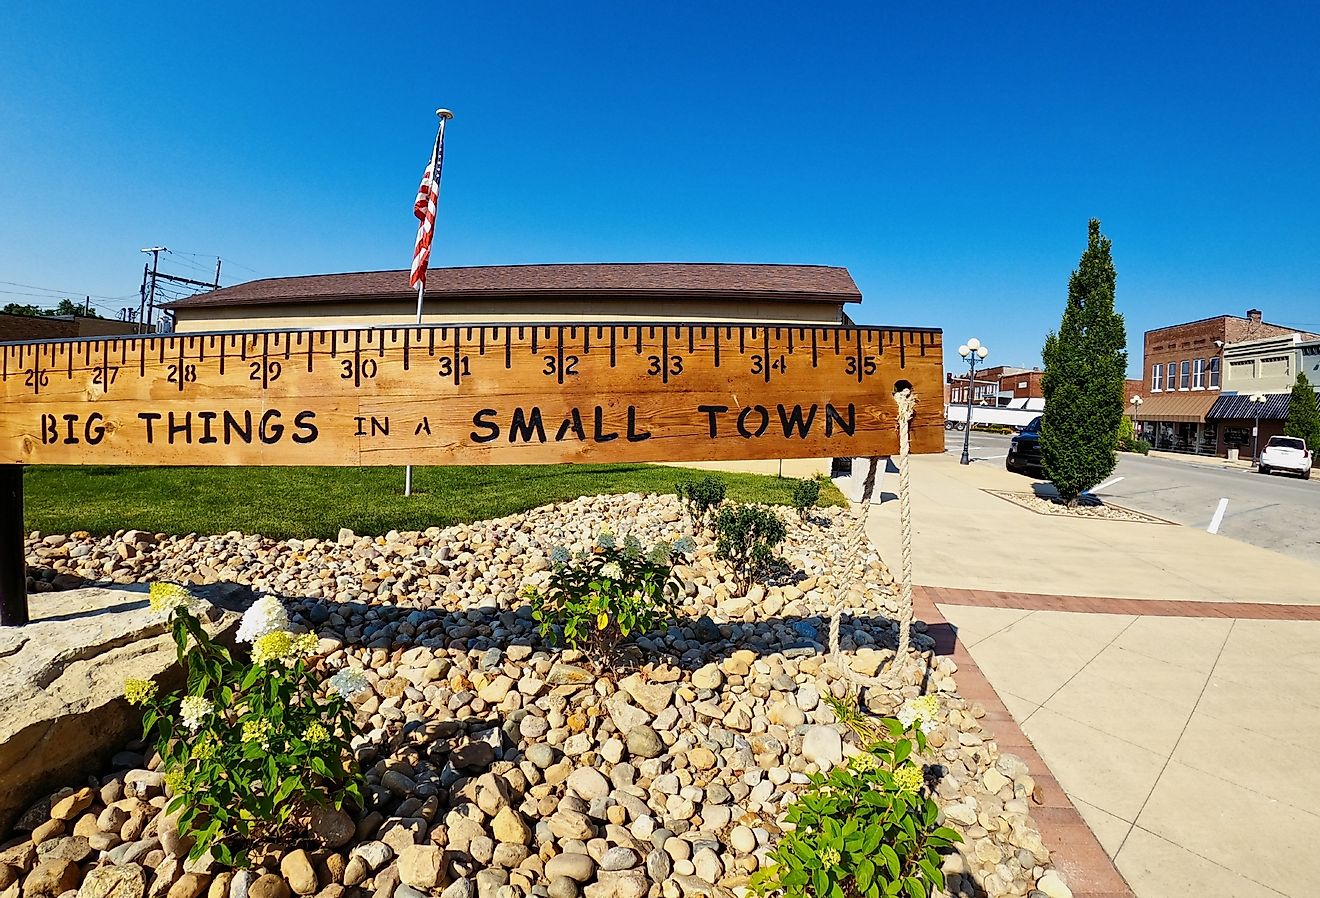 A giant wooden ruler in a park near the center of town in Casey, Illinois.